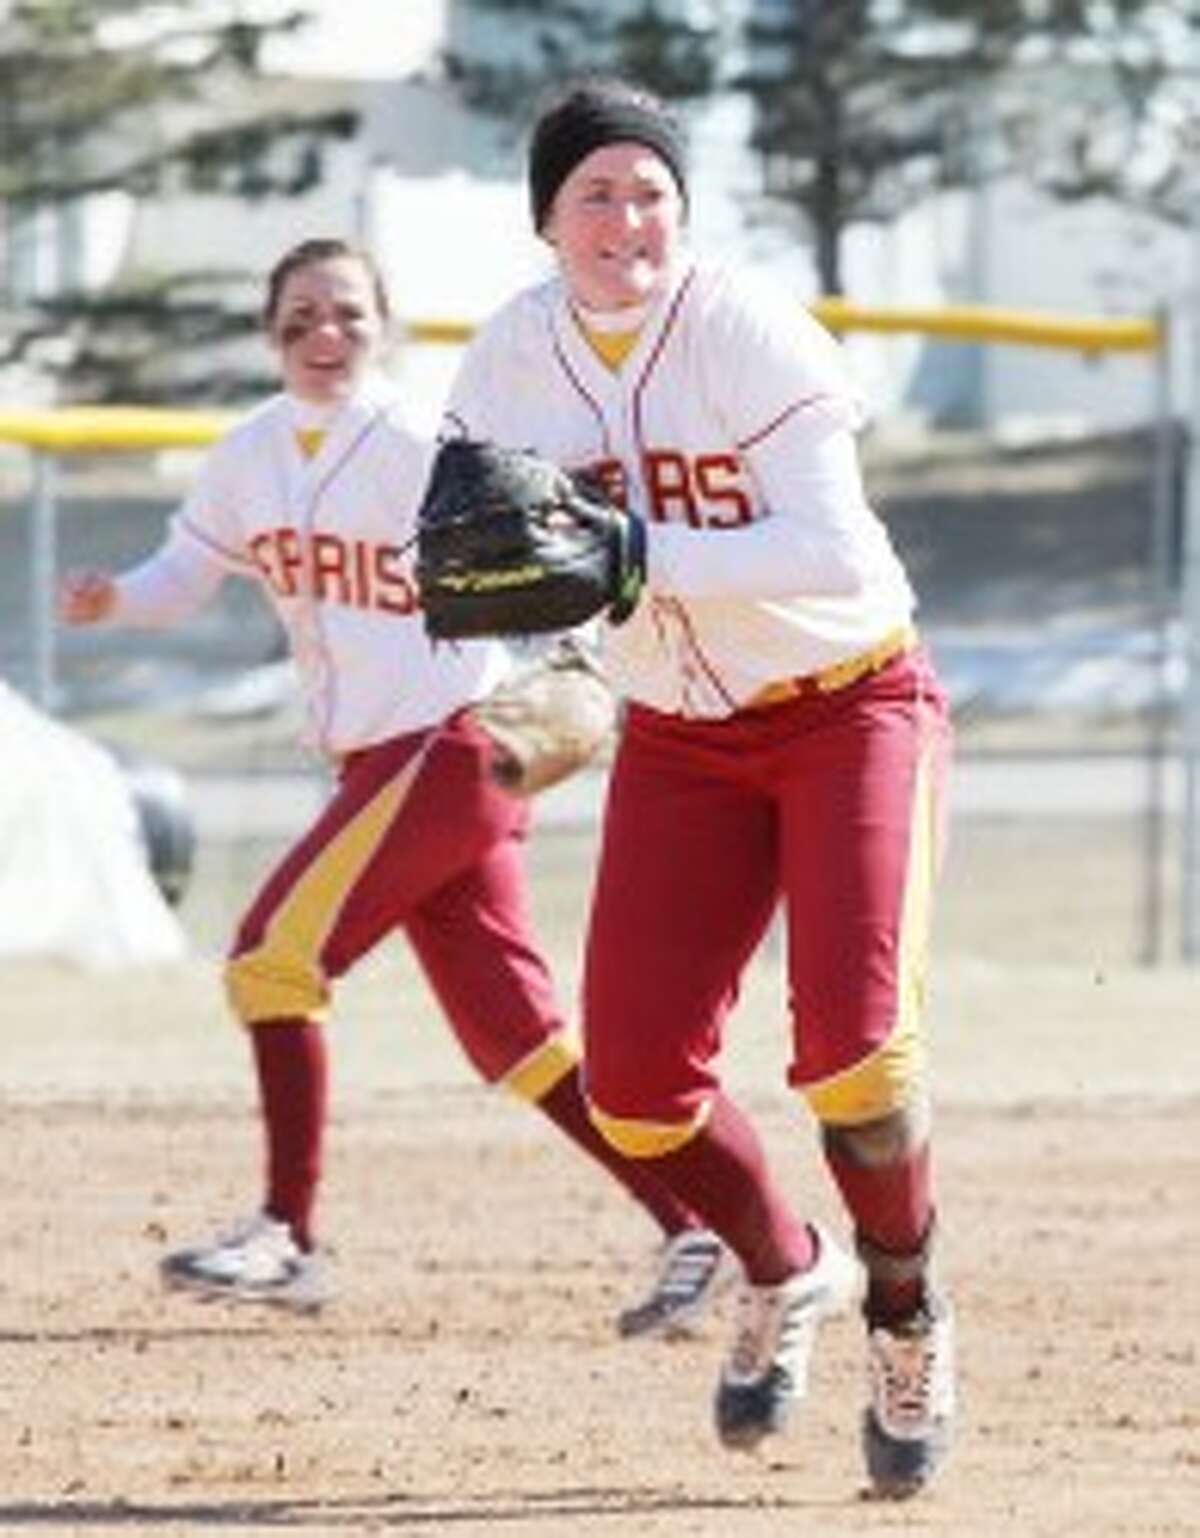 BIG WEEK: Amy Dunleavy had three home runs and 11 RBIs for Ferris State last week. (Pioneer file photo)